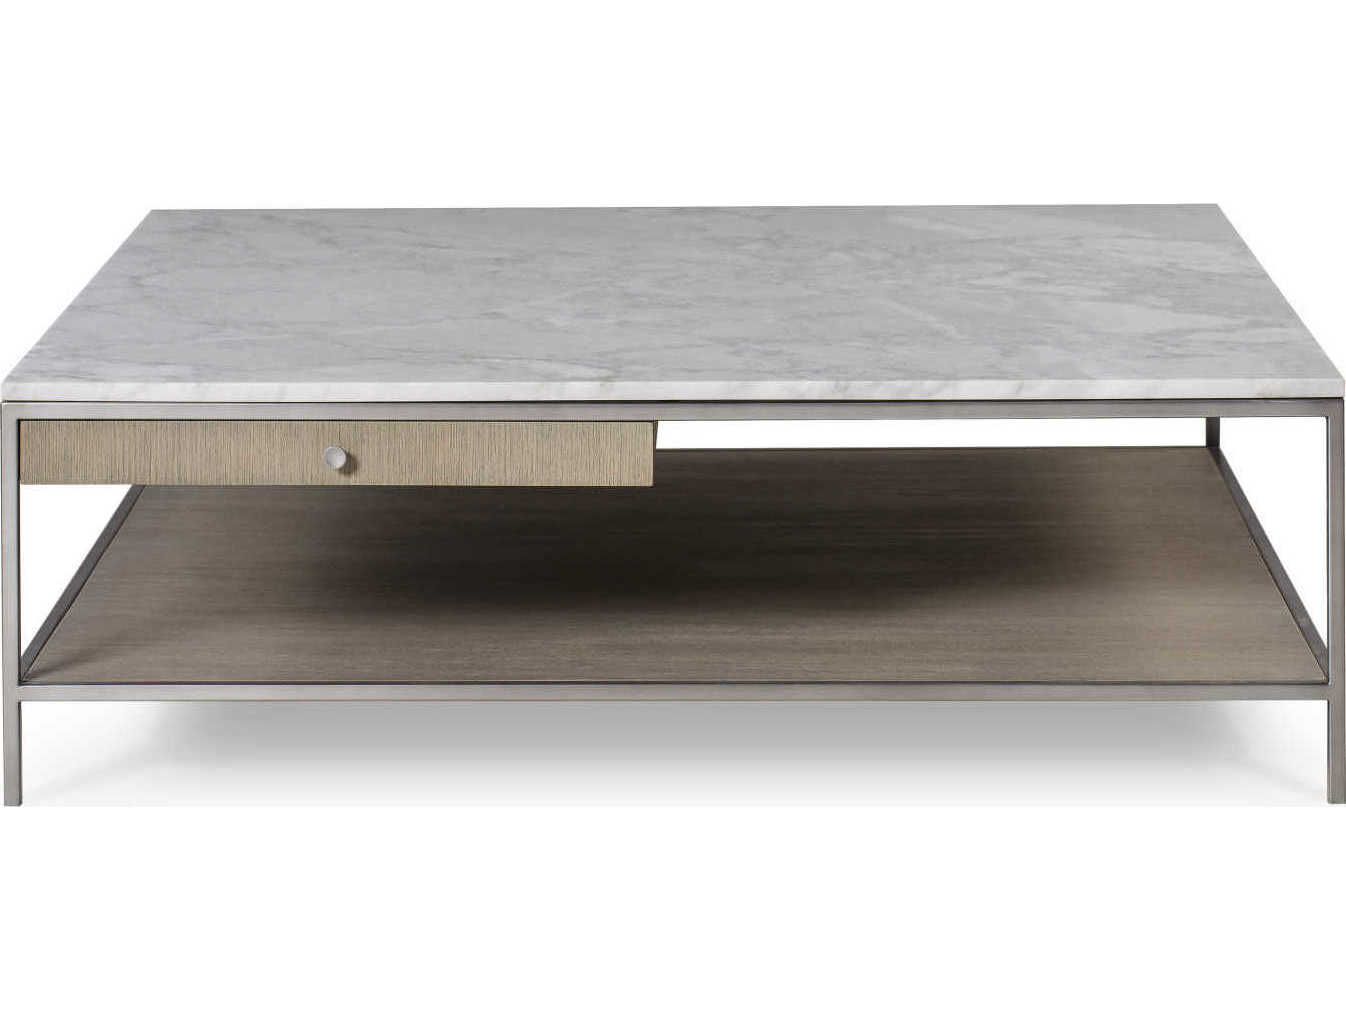 Sonder Distribution Paxton Silver Oak With Brushed Nickel 50 Wide Square Coffee Table Rd0801283